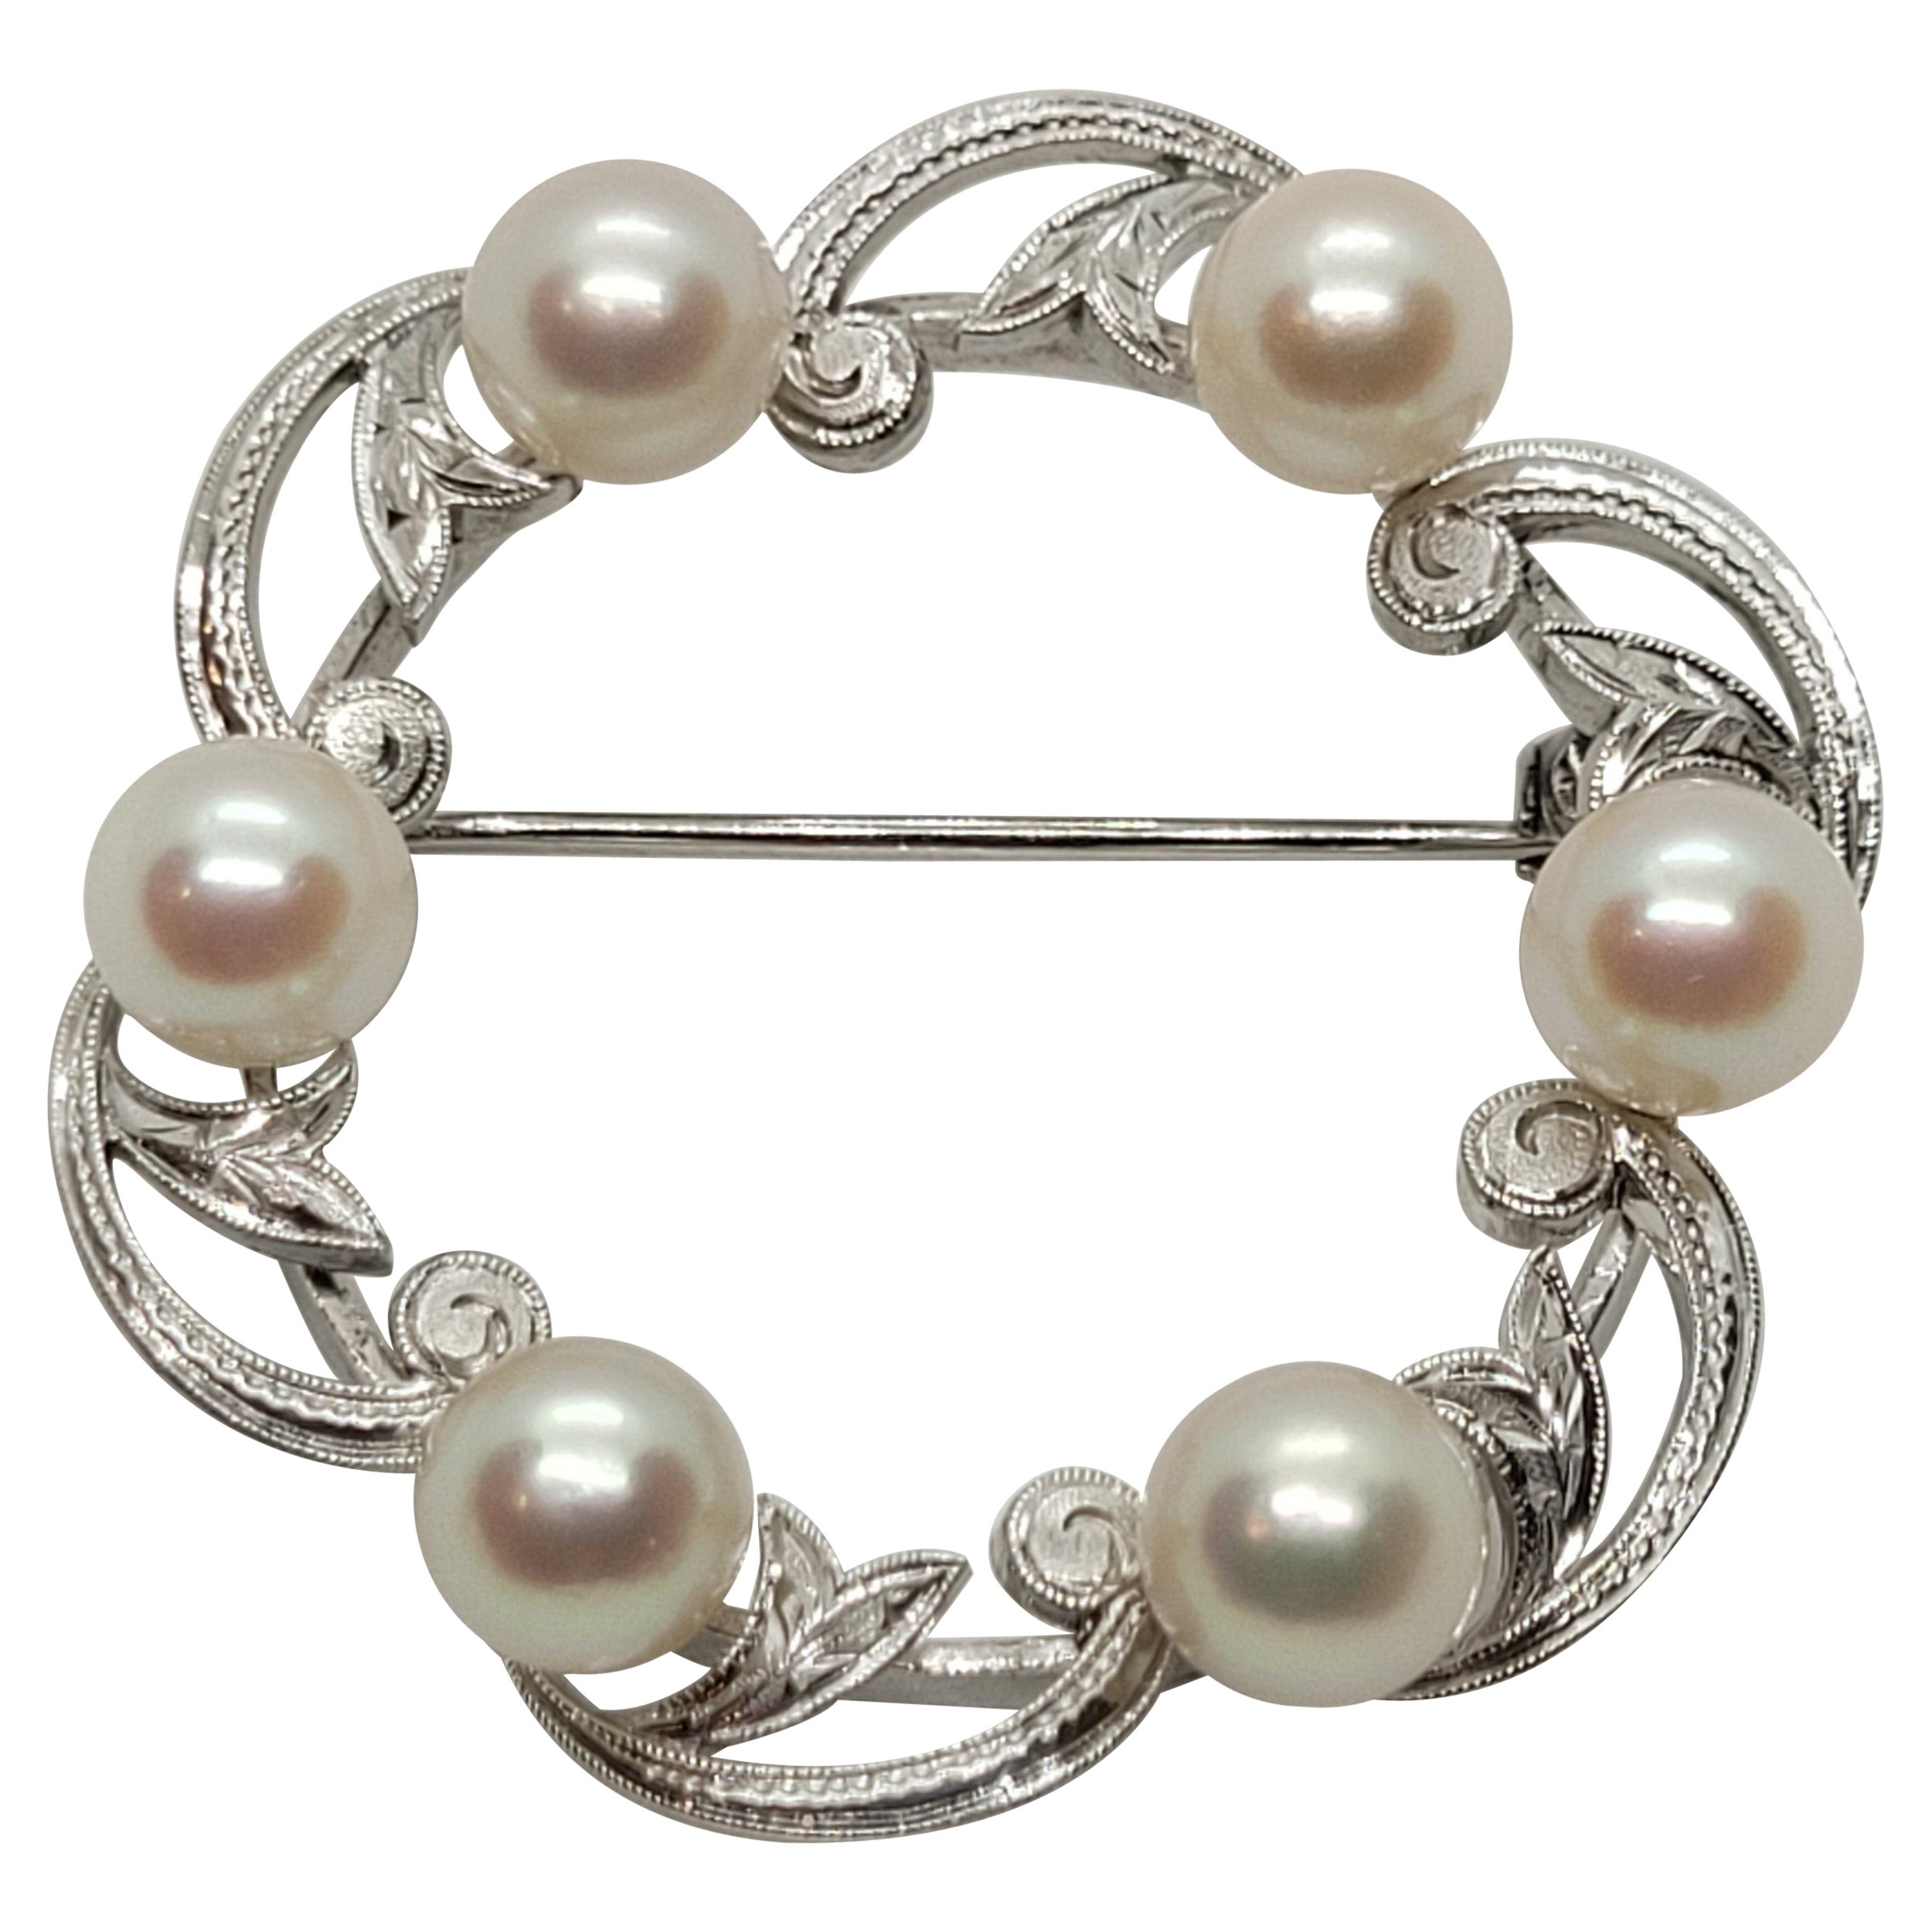 Sterling Silver Mikimoto Pearl Brooch, Tokyo, Stamped, 1960s, Vintage